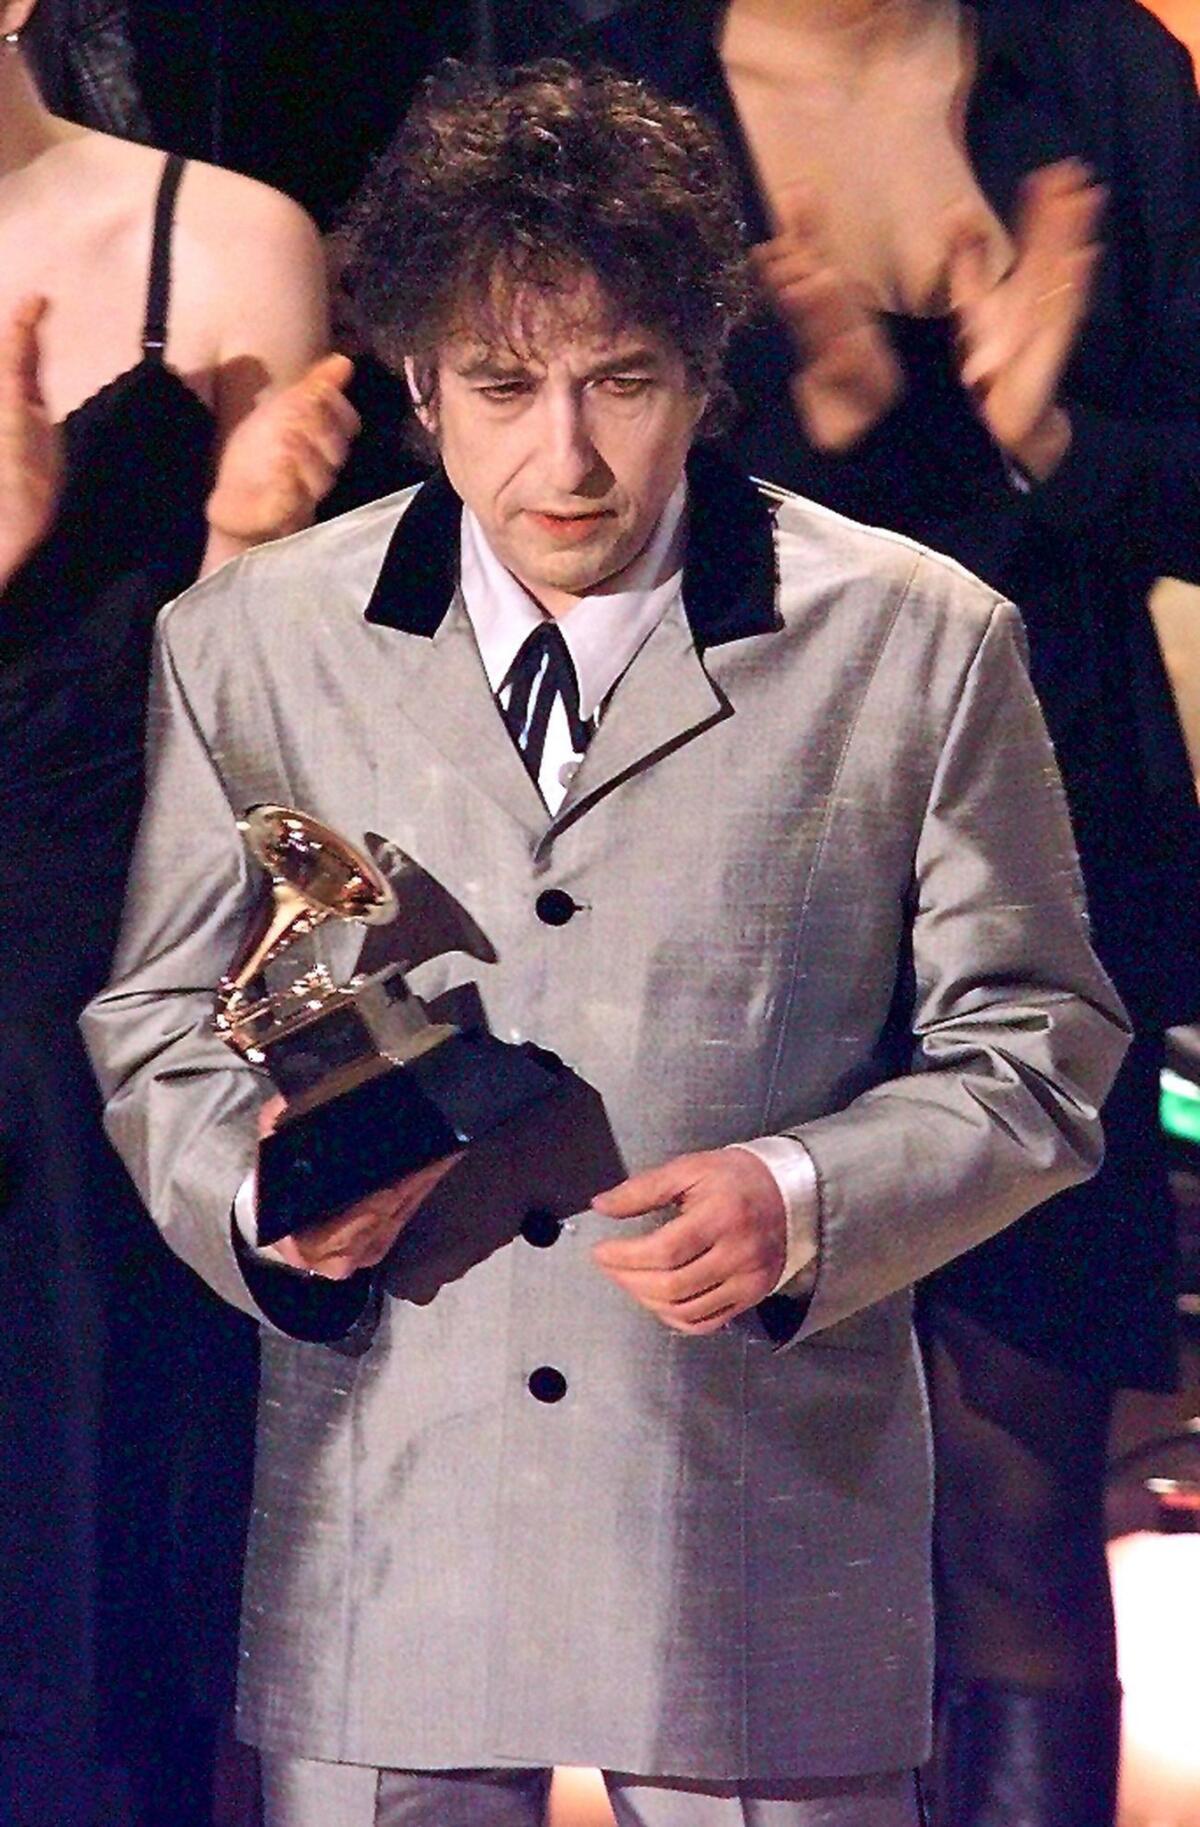 Bob Dylan, receiving the 1998 Grammy Award for album of the year for "Time Out of Mind." He didn't win his first Grammy until 1973.